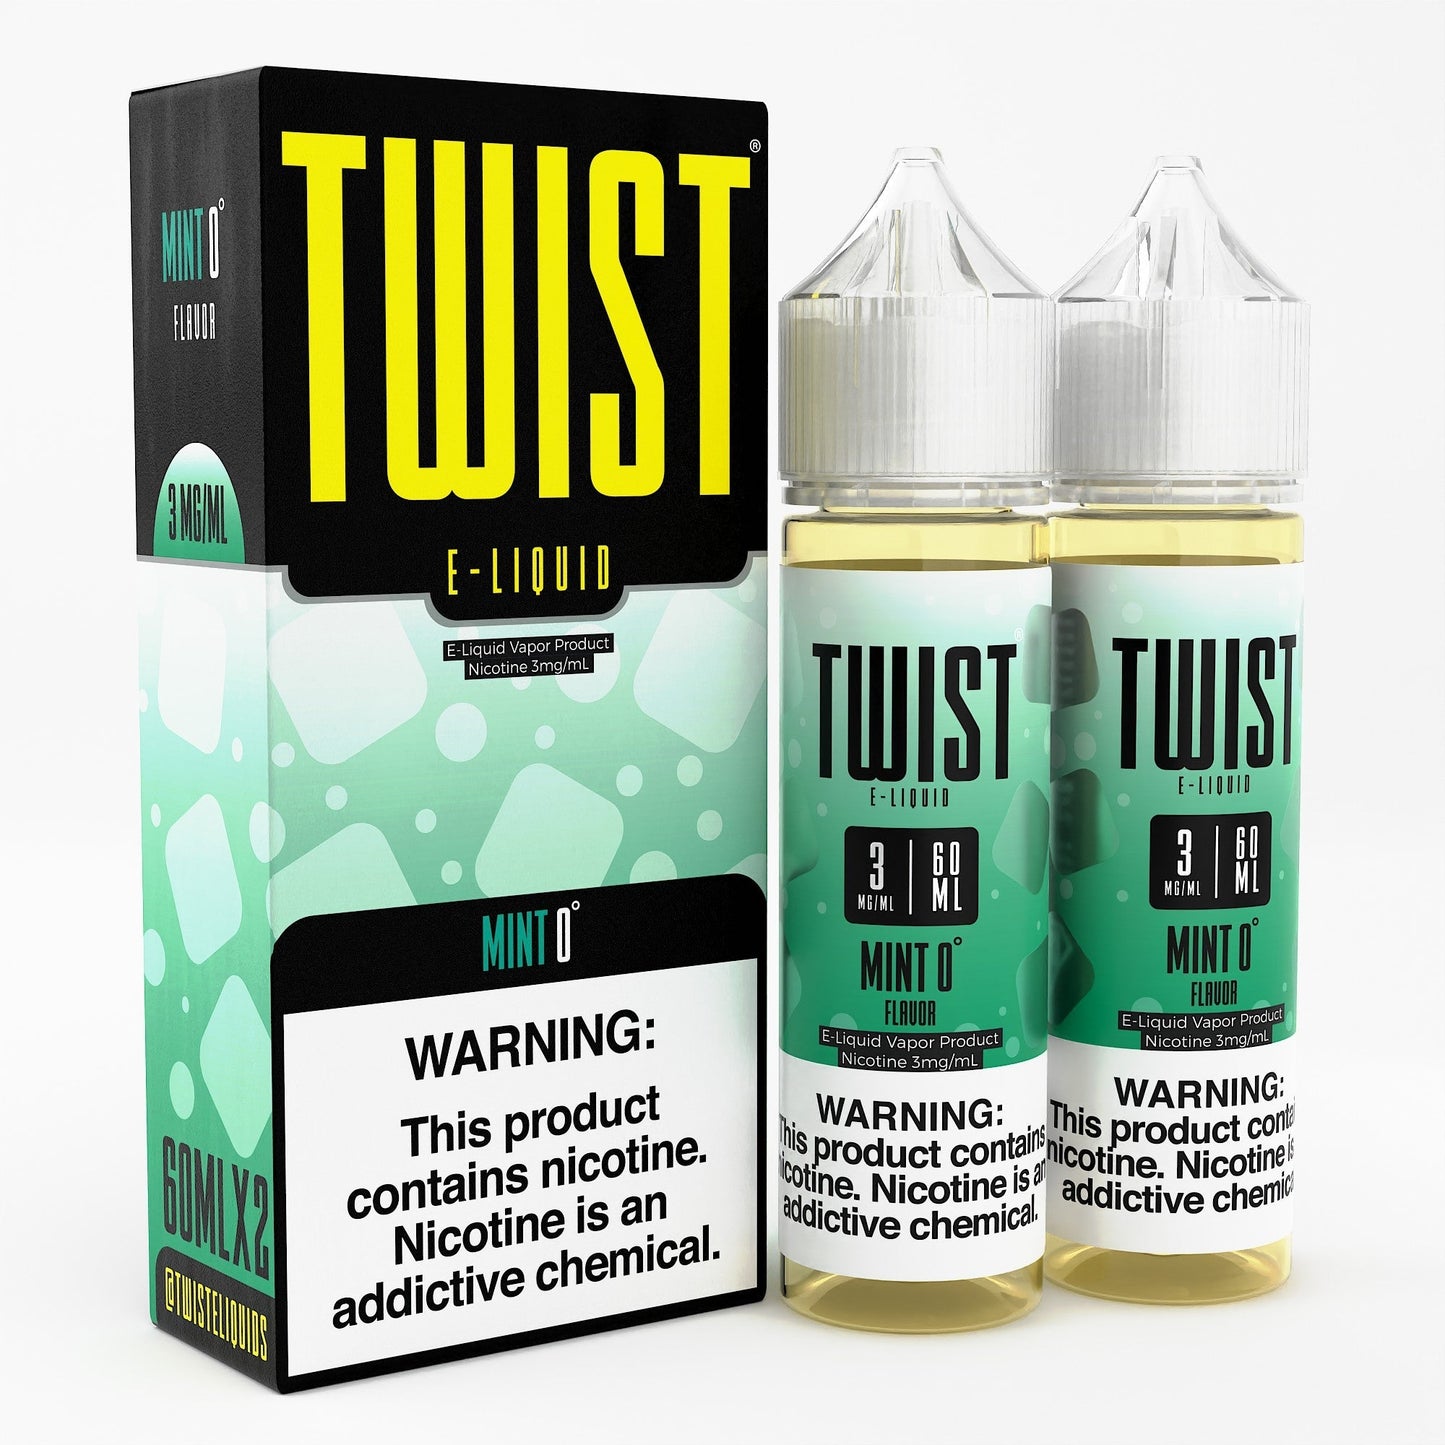 Mint 0° (Arctic Cool Mint) by Twist Series 120mL with Packaging